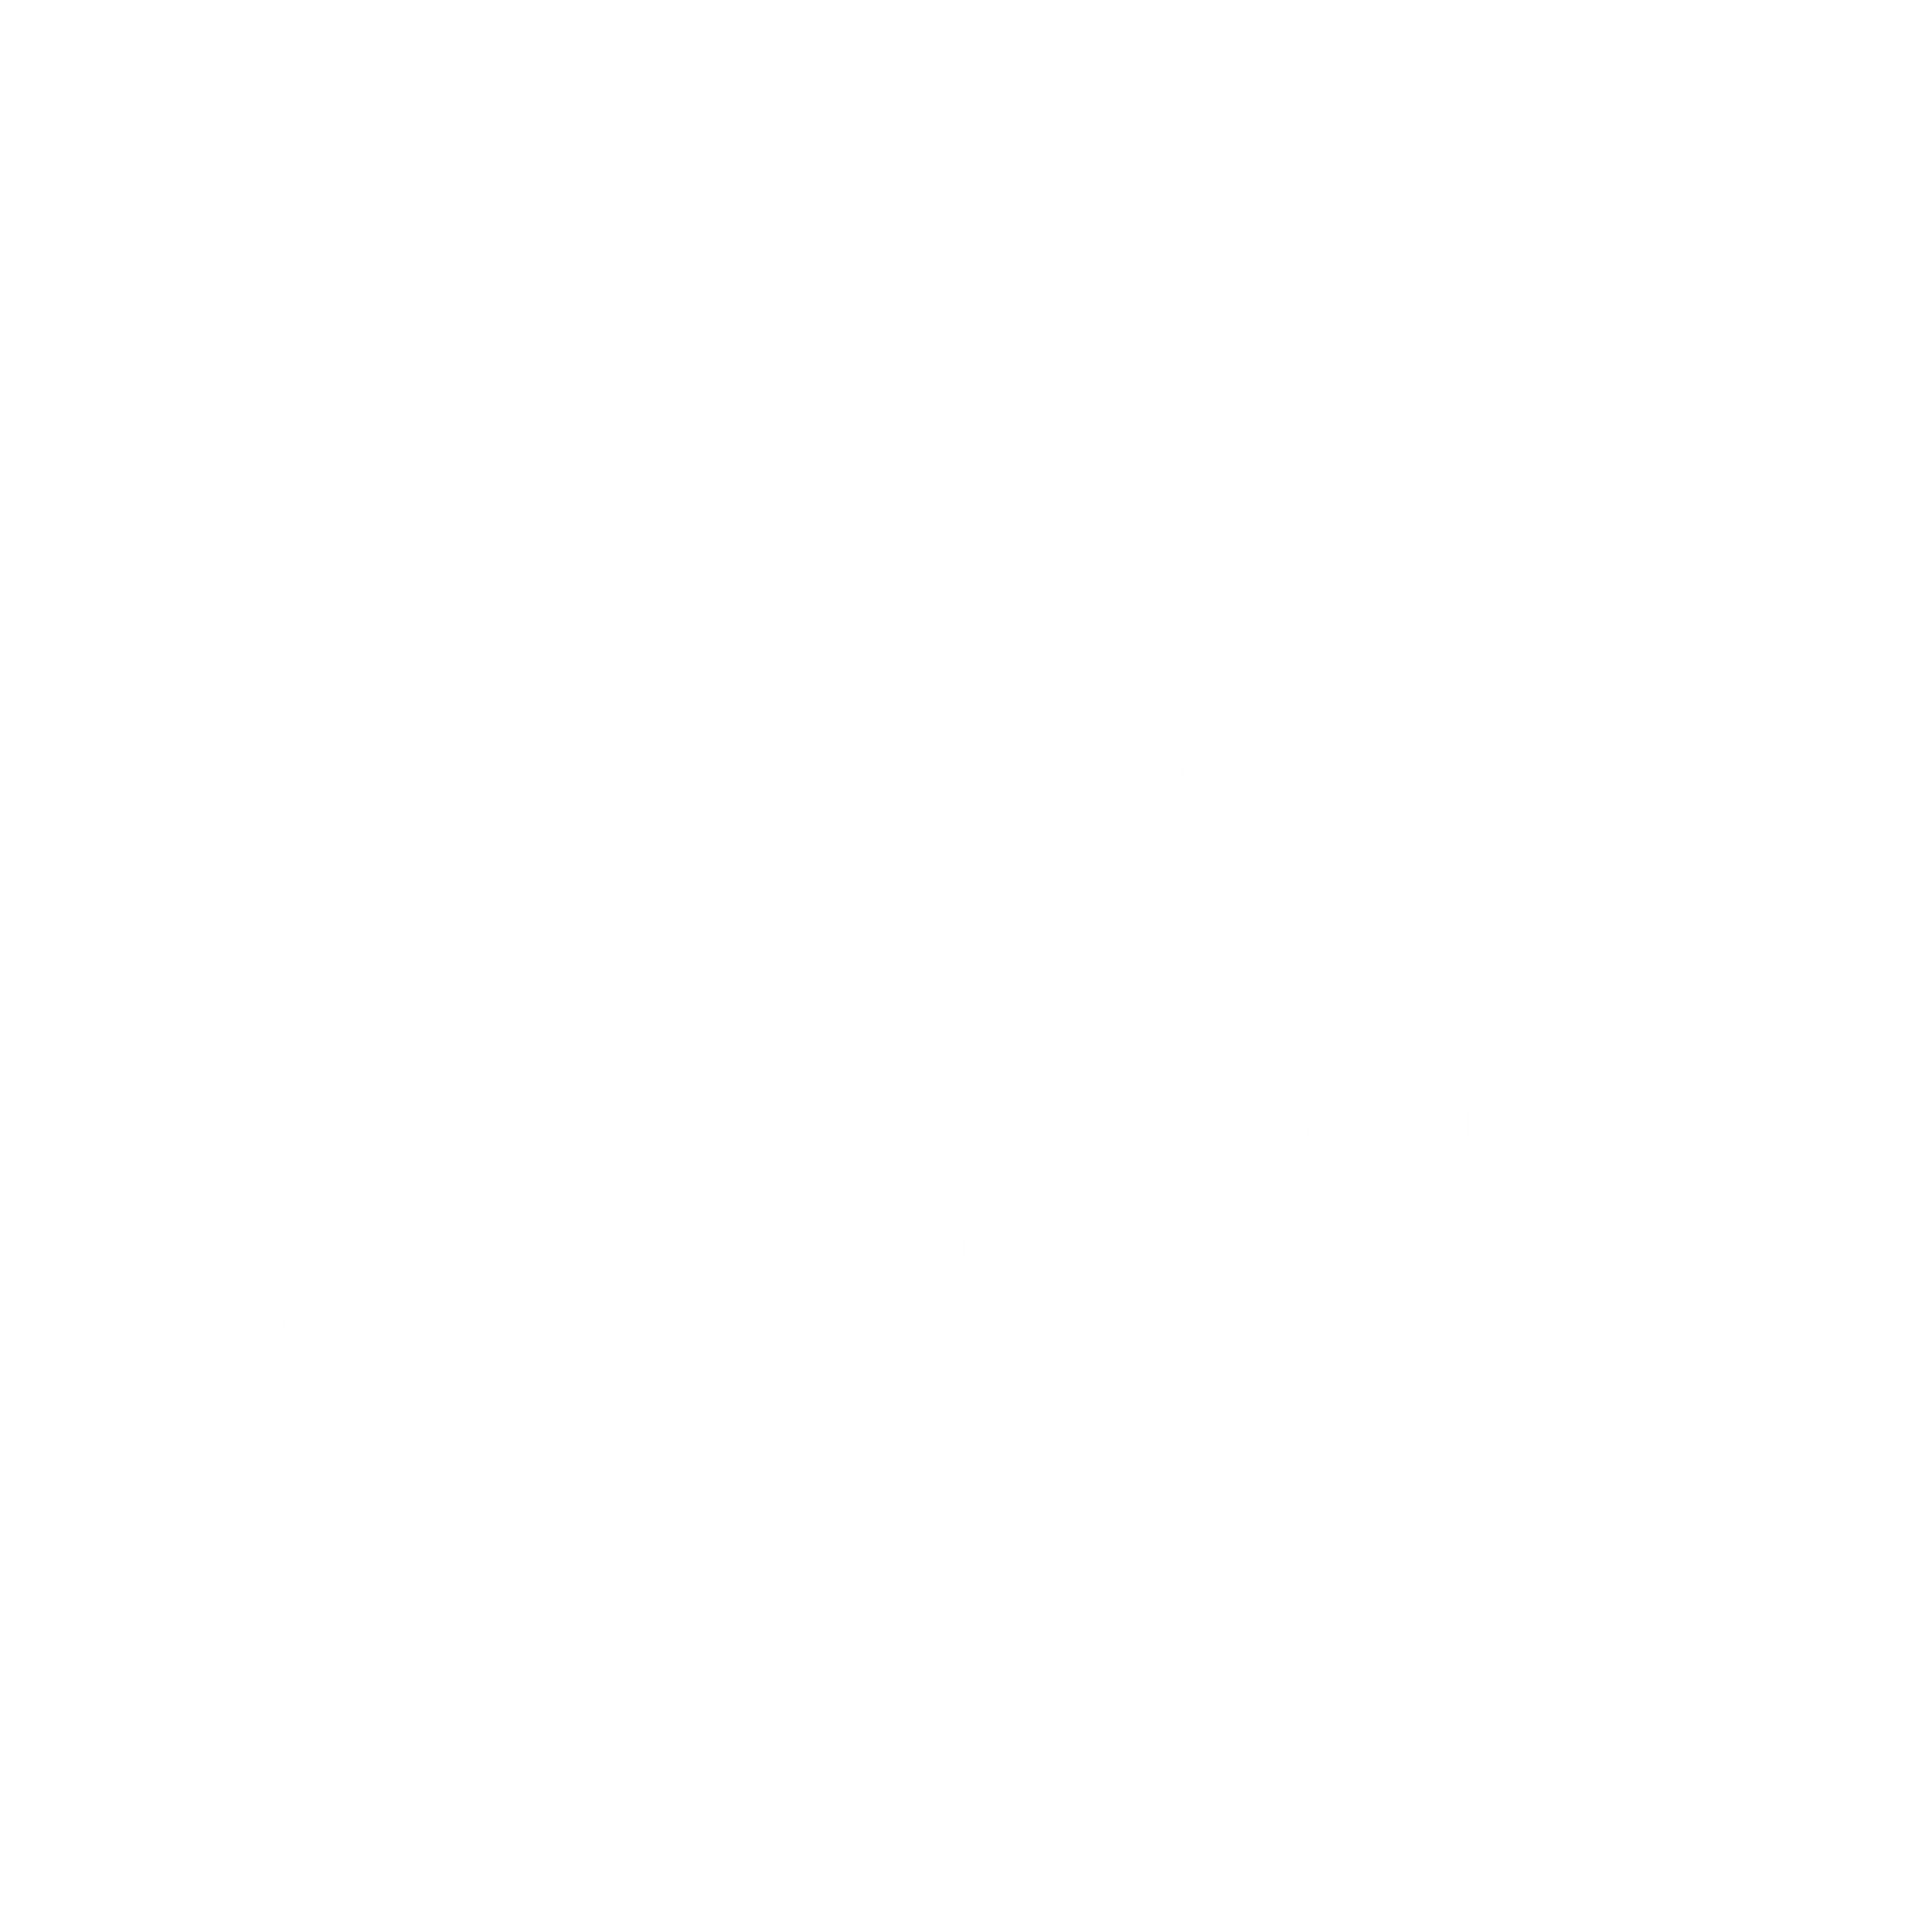 Red House Property Management Logo